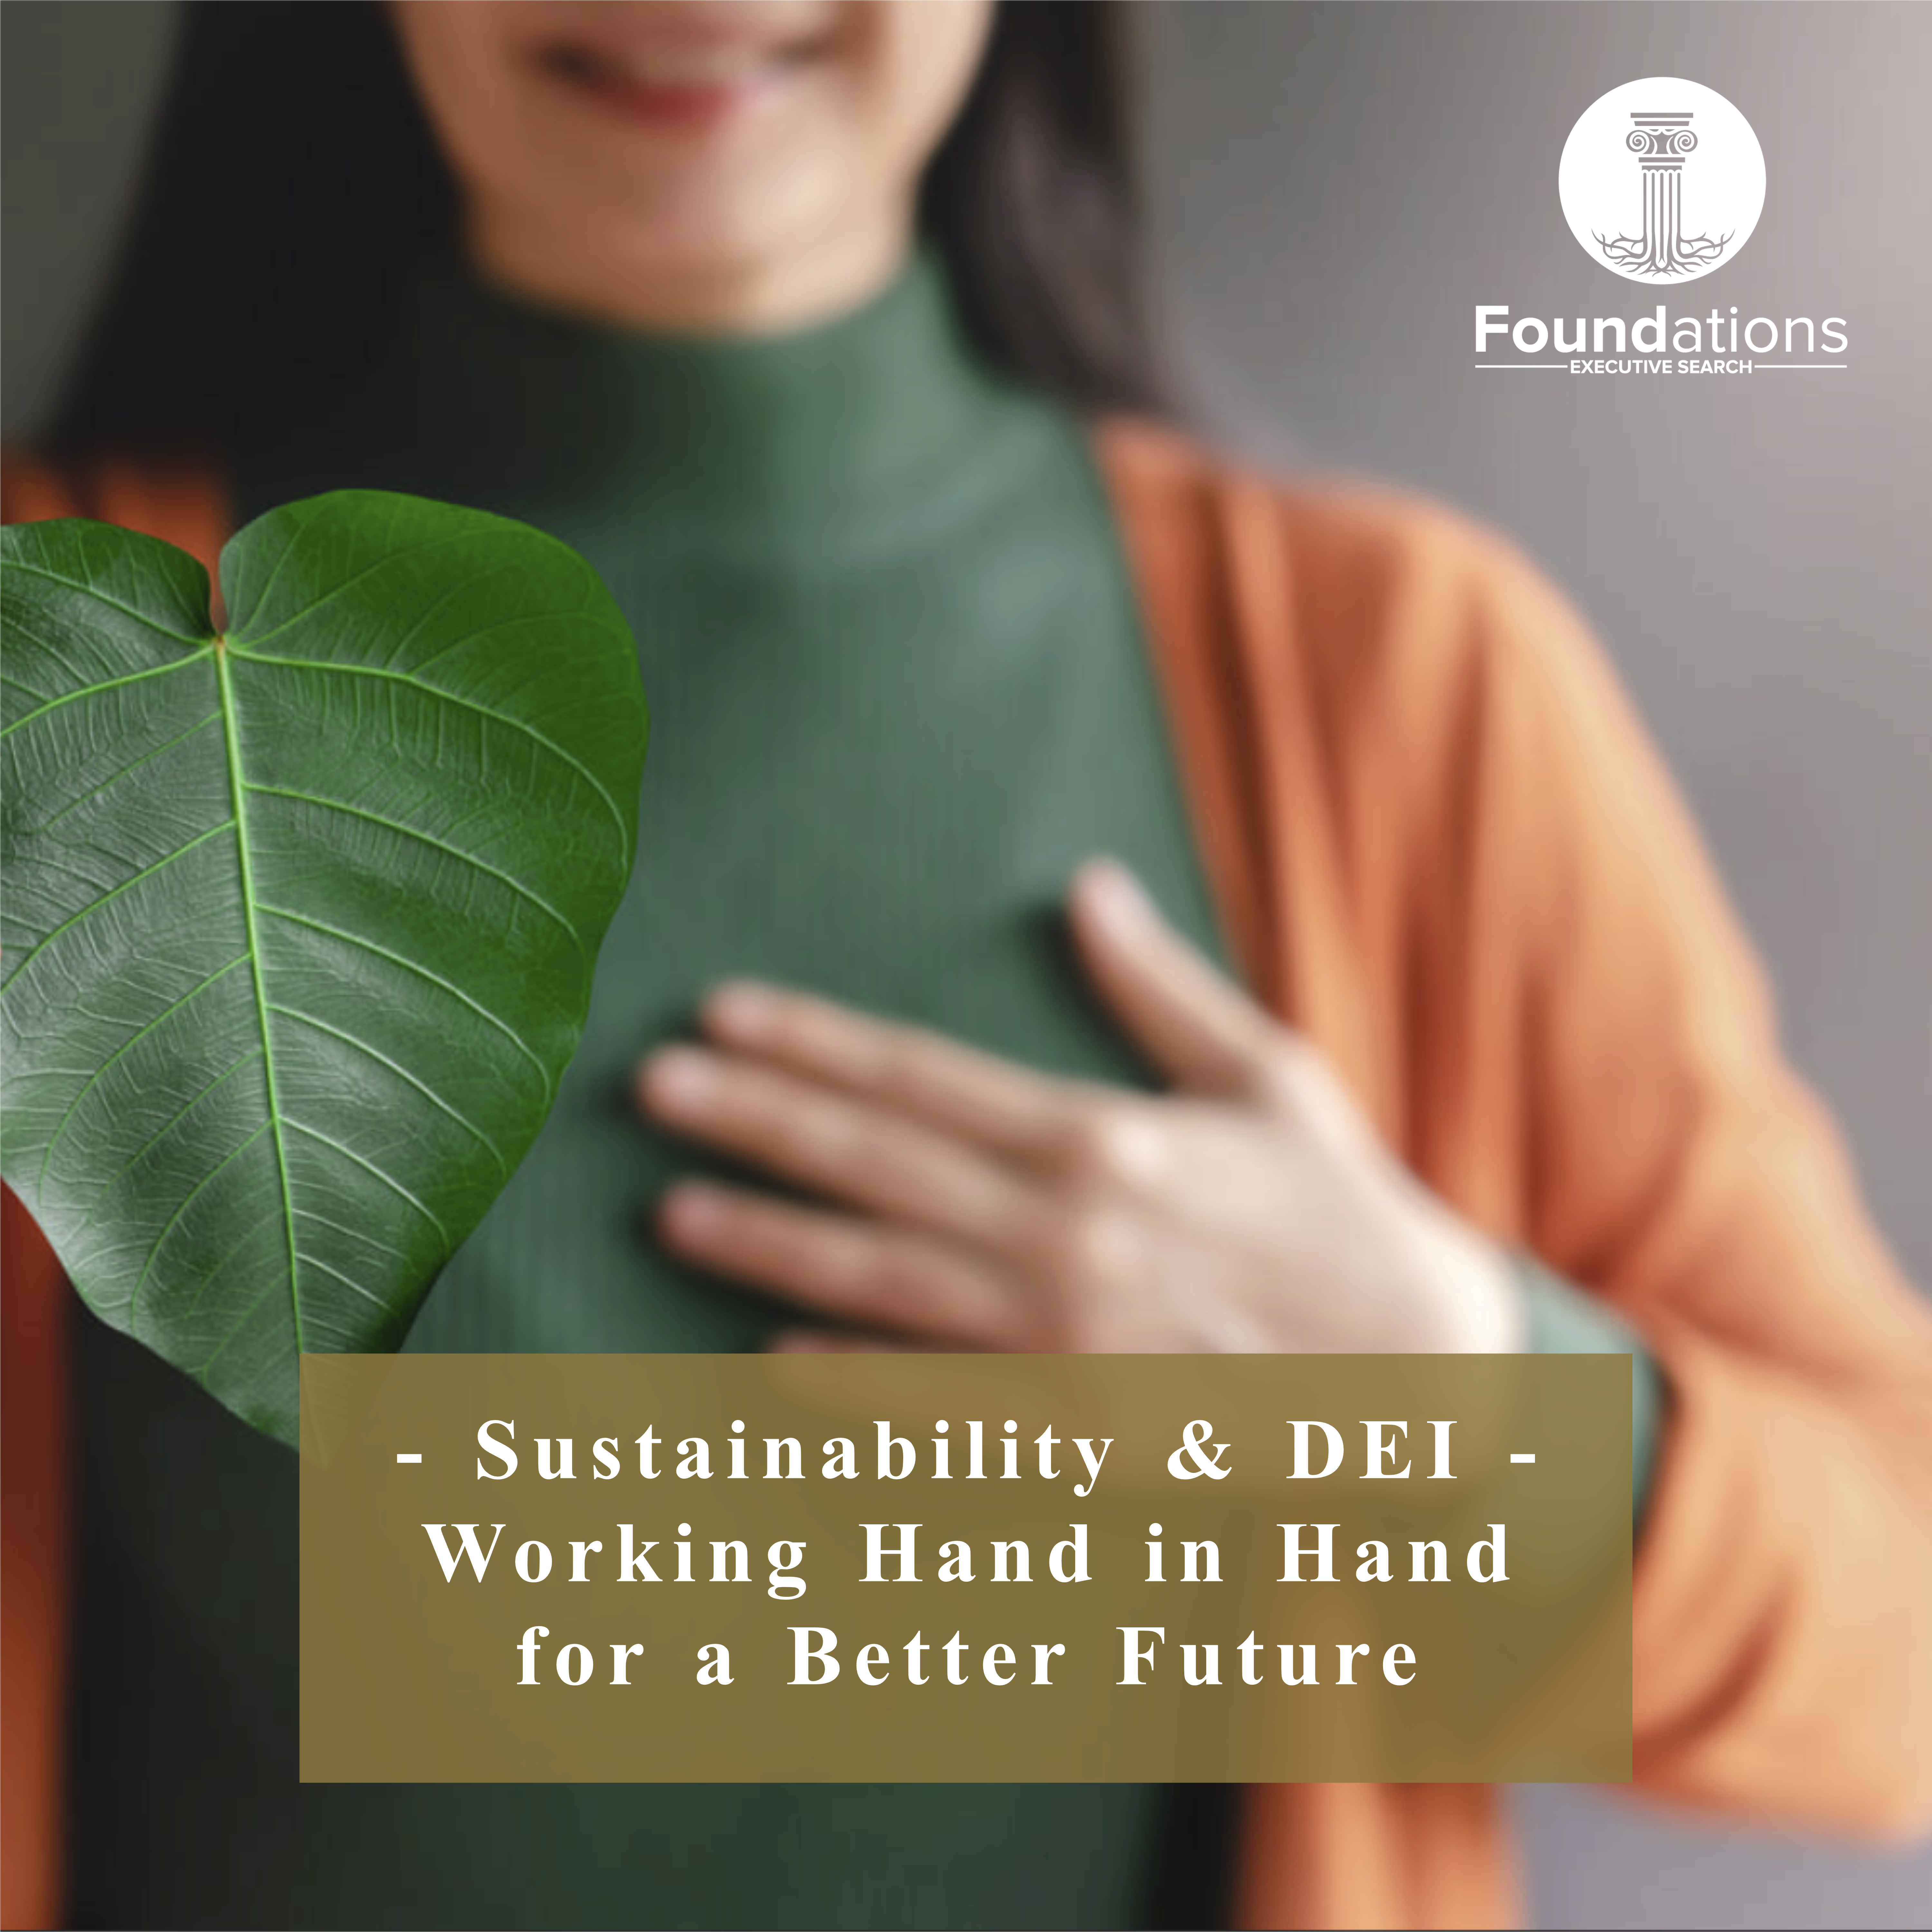 Sustainability & DEI - Working Hand in Hand for a Better Future